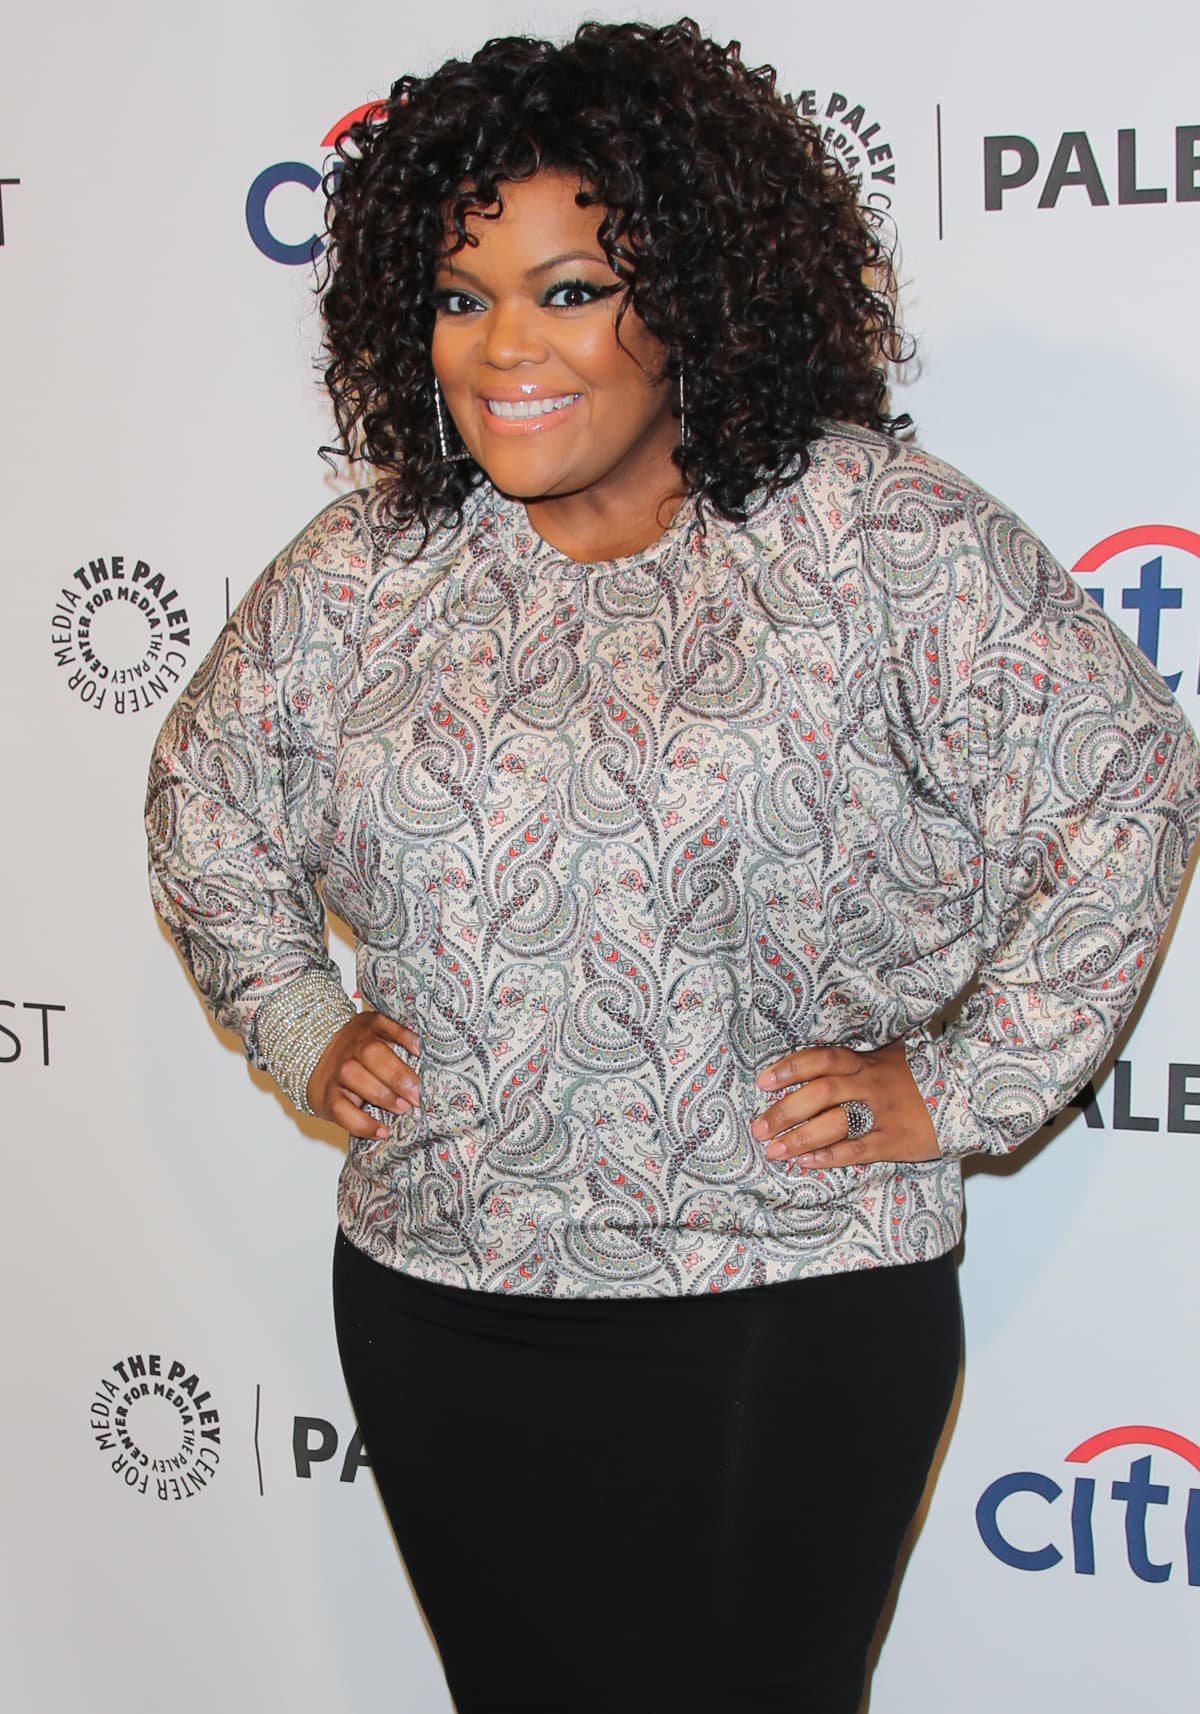 LOS ANGELES, CALIFORNIA - JANUARY 18: Actress Yvette Nicole Brown attends the Black Rebirth Collective event  at Nate Holden Performing Arts Center on January 18, 2020 in Los Angeles, California. (Photo by Robin L Marshall/Getty Images)